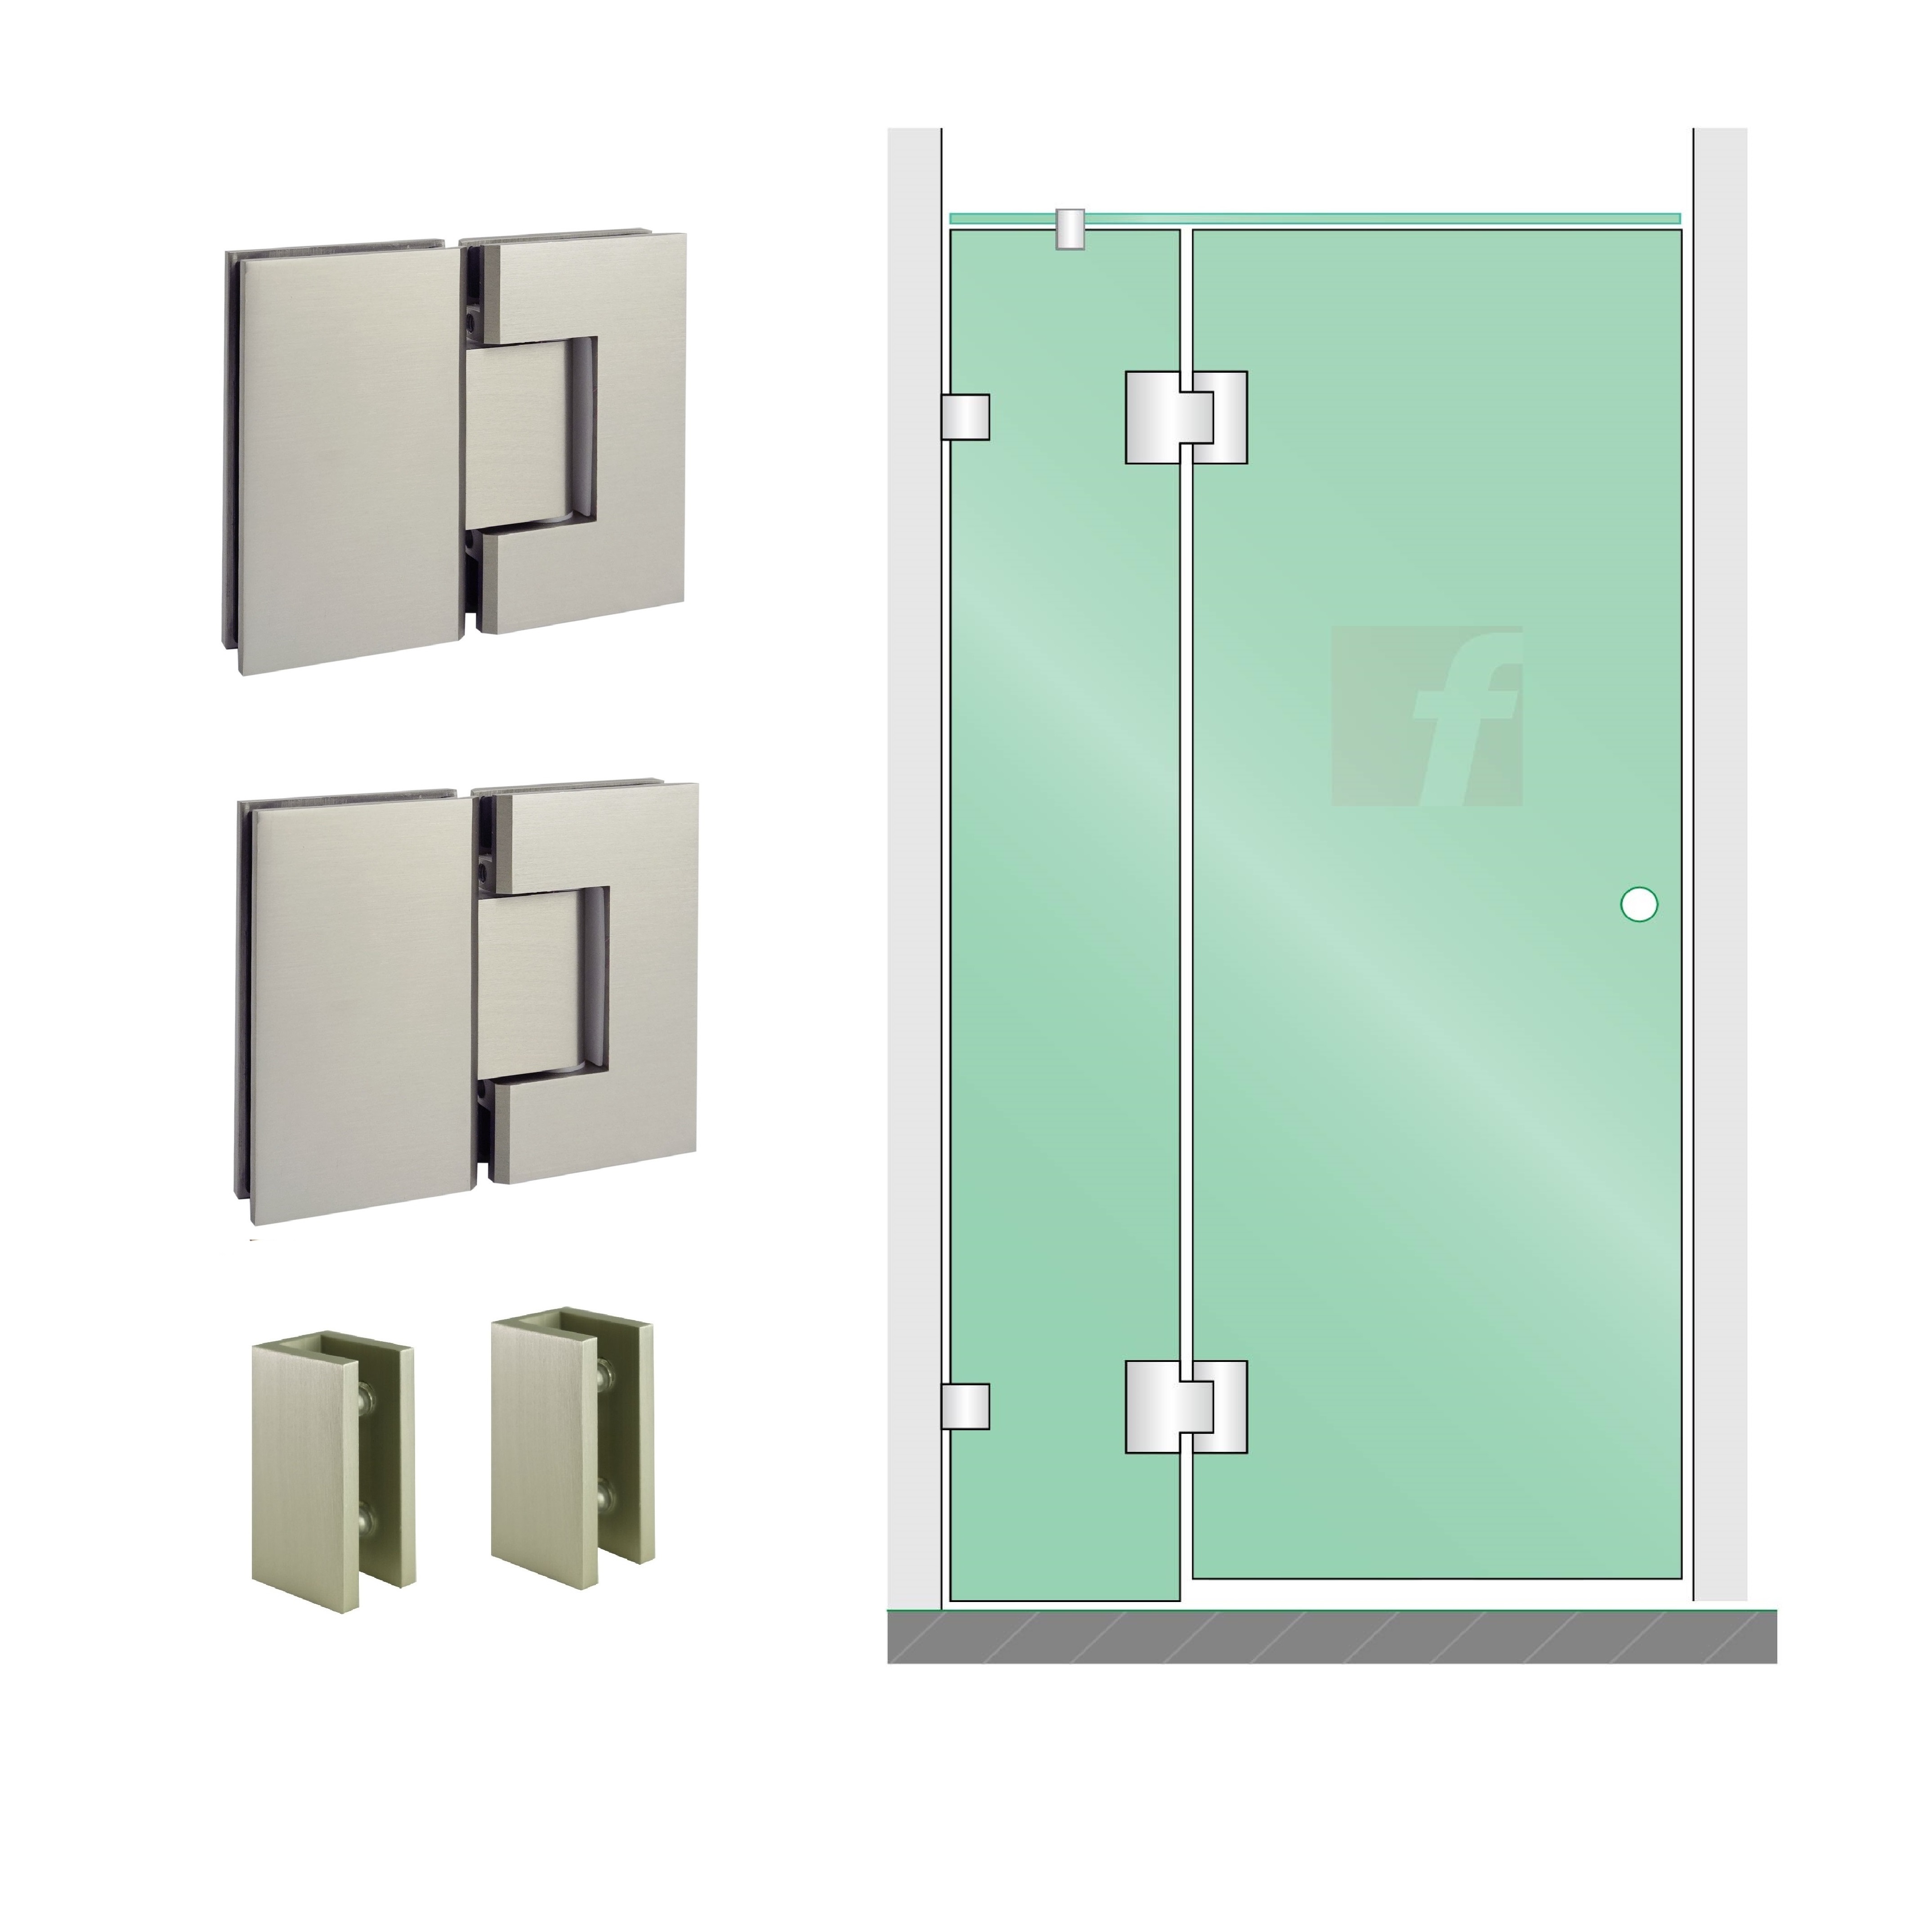 2 PANEL A (IN-LINE) WITH BRUSHED NICKEL HARDWARE